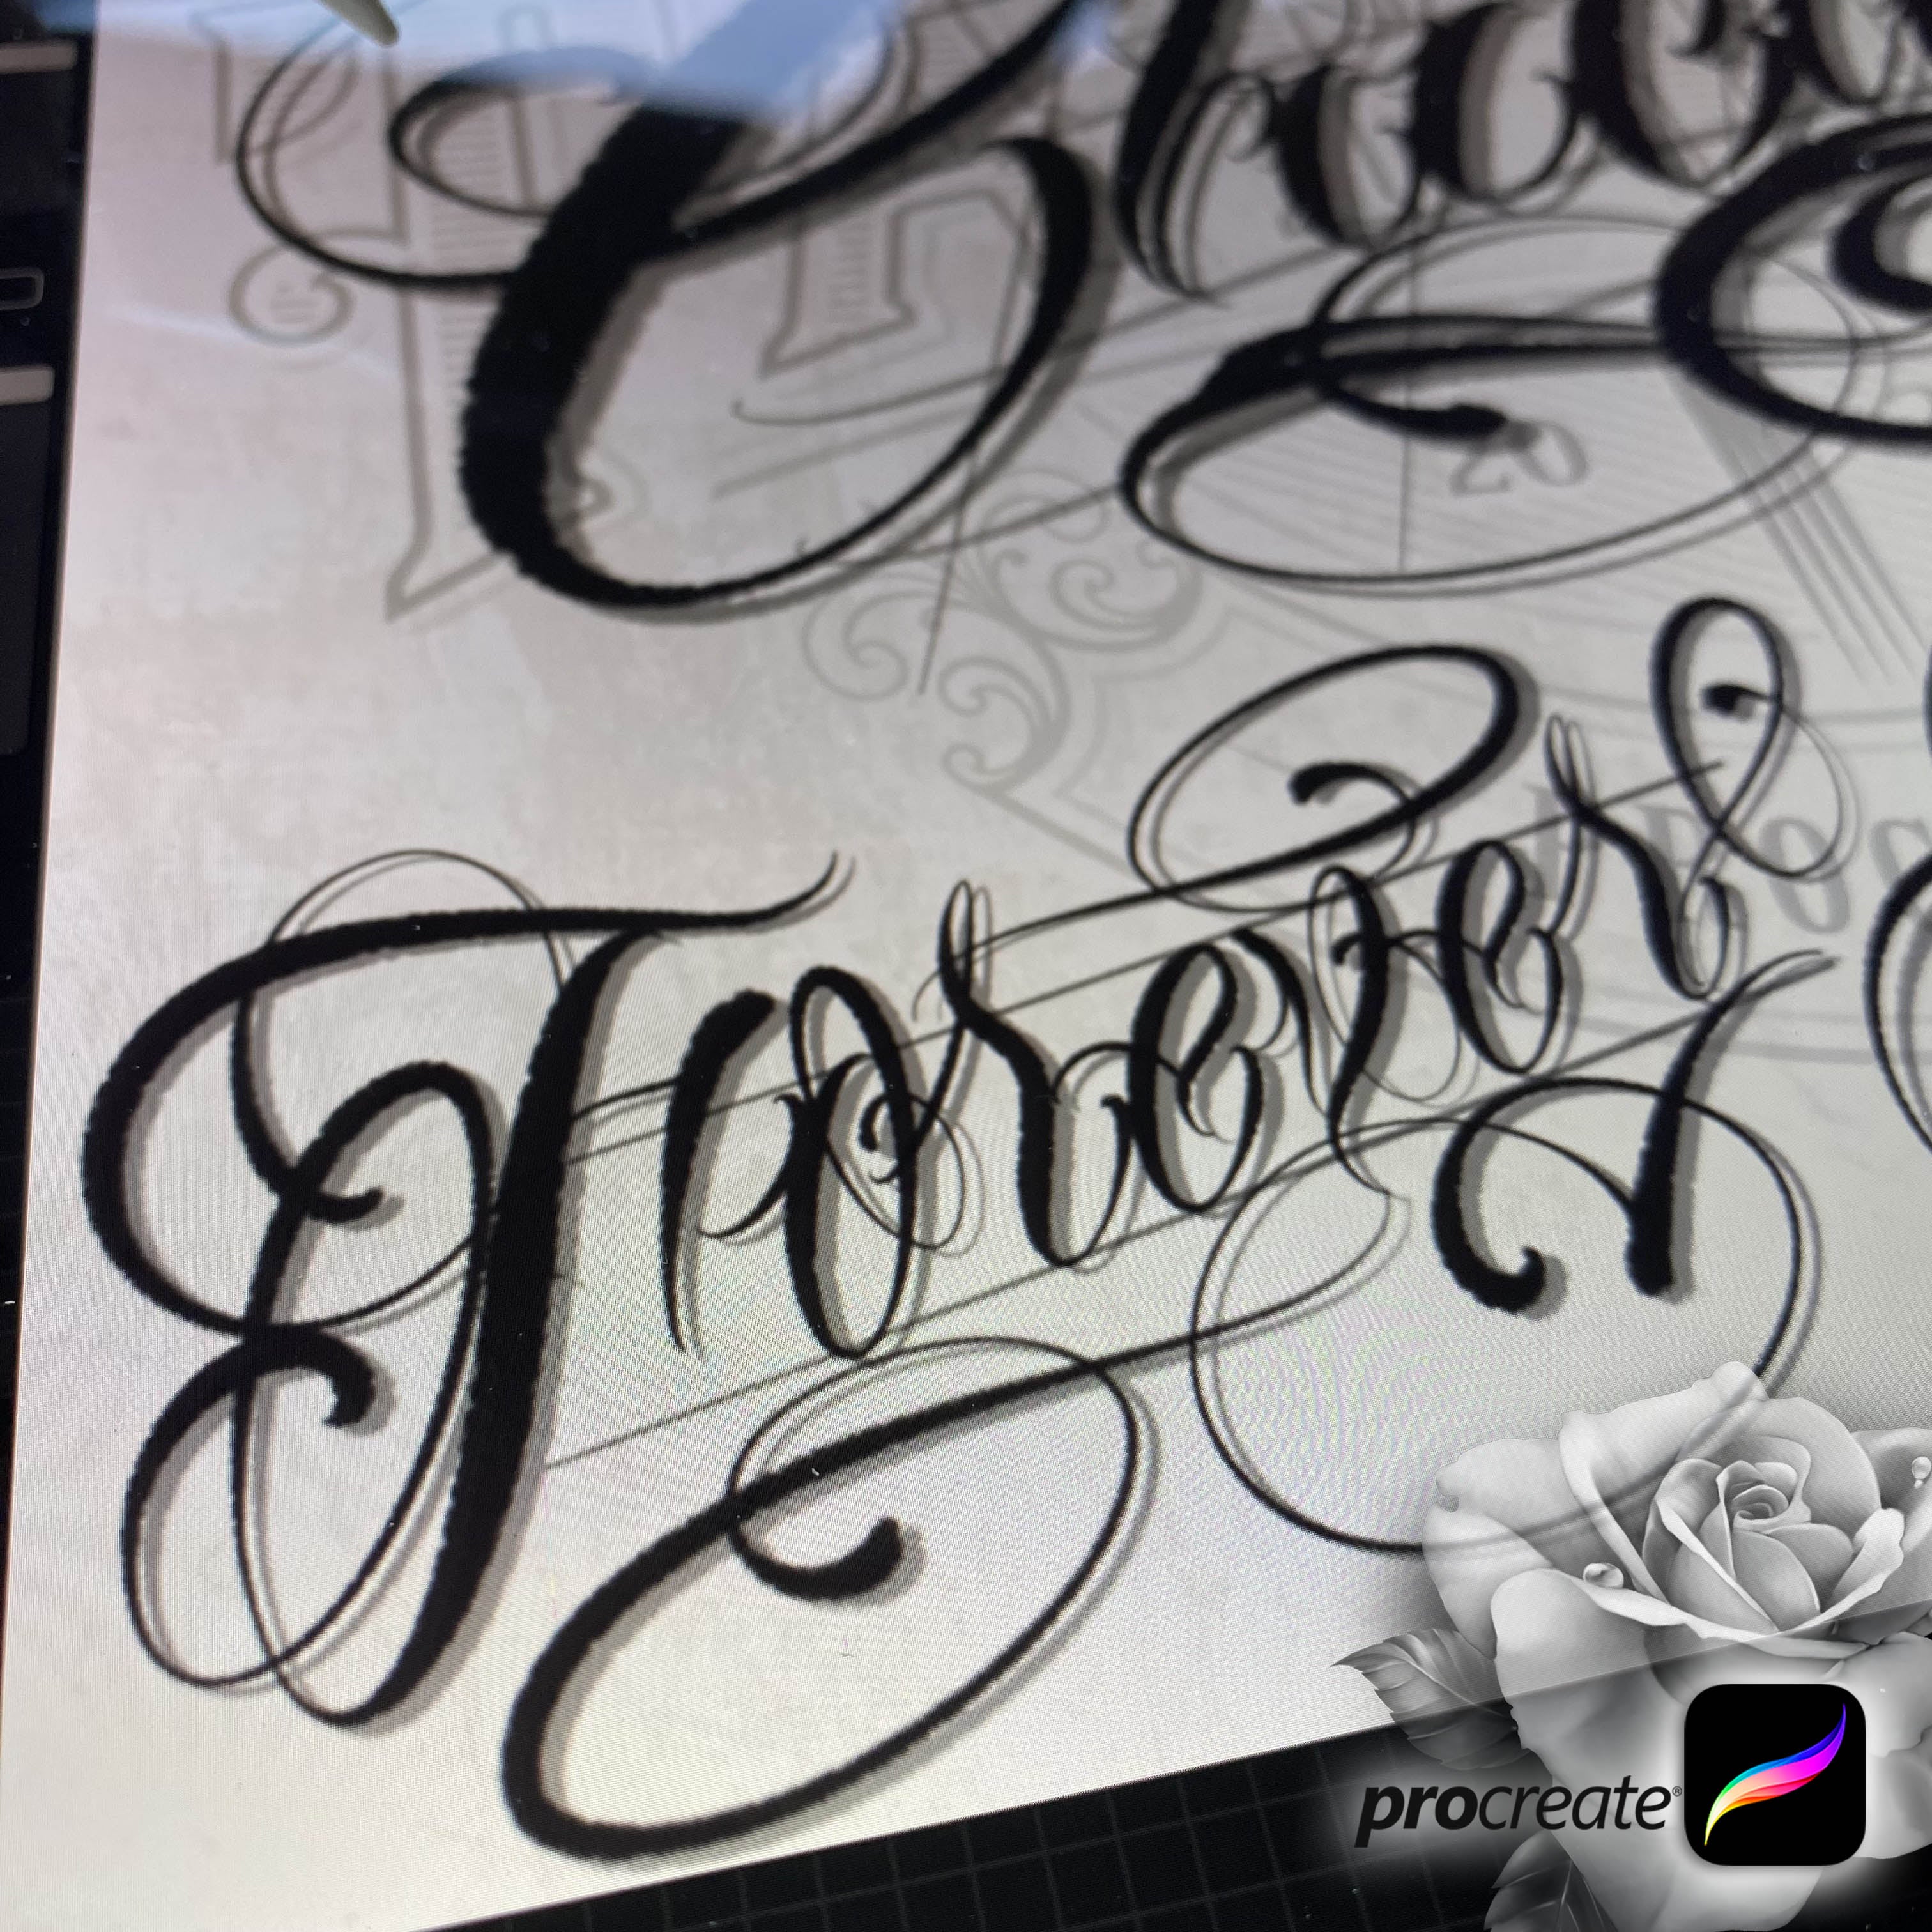 375+ Best Free Procreate Brushes & Brush Sets — 2023 | Tattoo lettering  styles, Tattoo lettering fonts, Graffiti lettering fonts